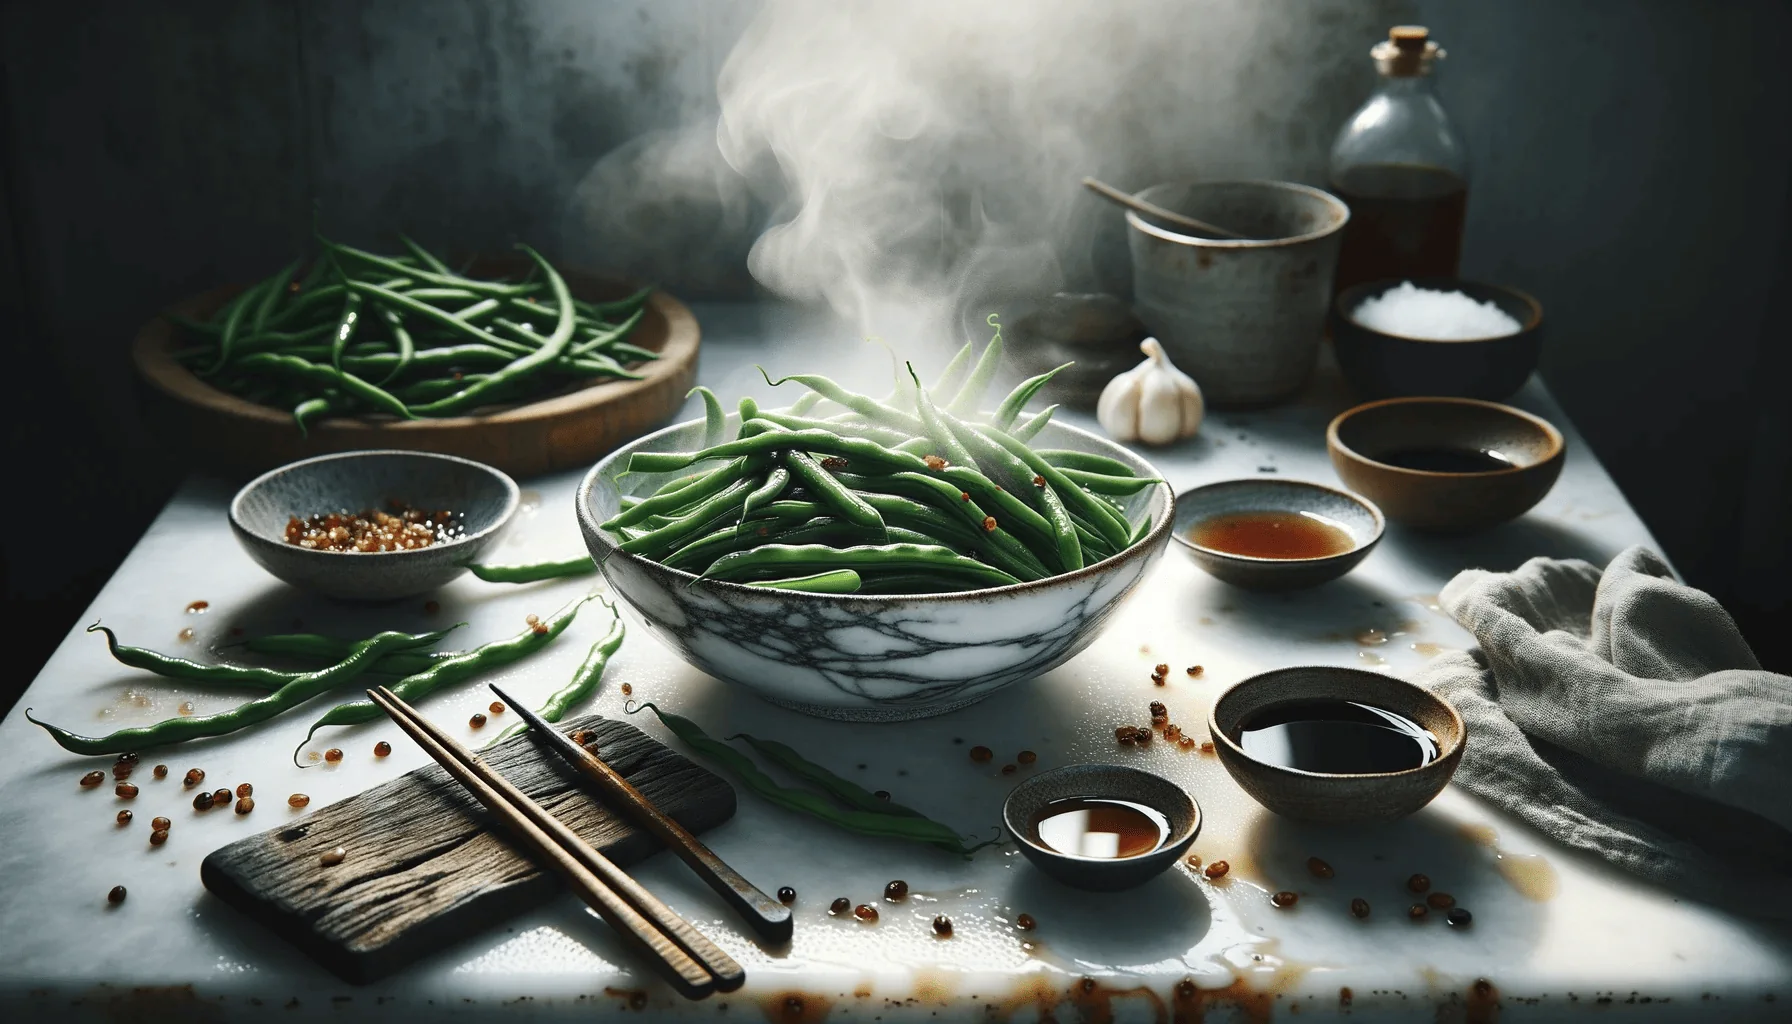 The making of soy-glazed green beans